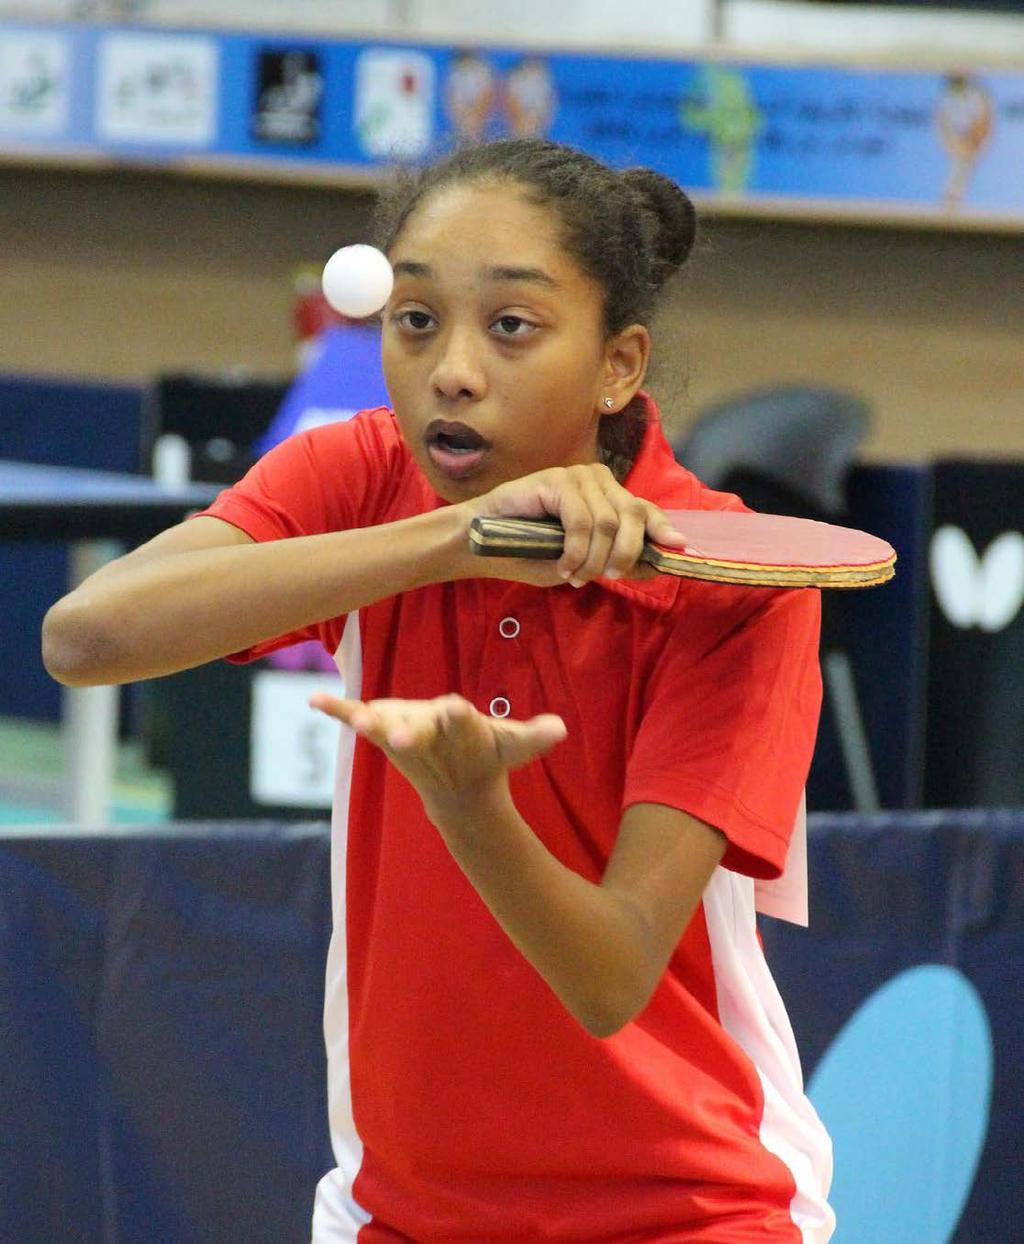 ITTF-Africa Junior Championships ITTF-Africa Junior Championships The ITTF-Africa Junior Championships are an annual event and provide an opportunity to see the future stars of table tennis in Africa.